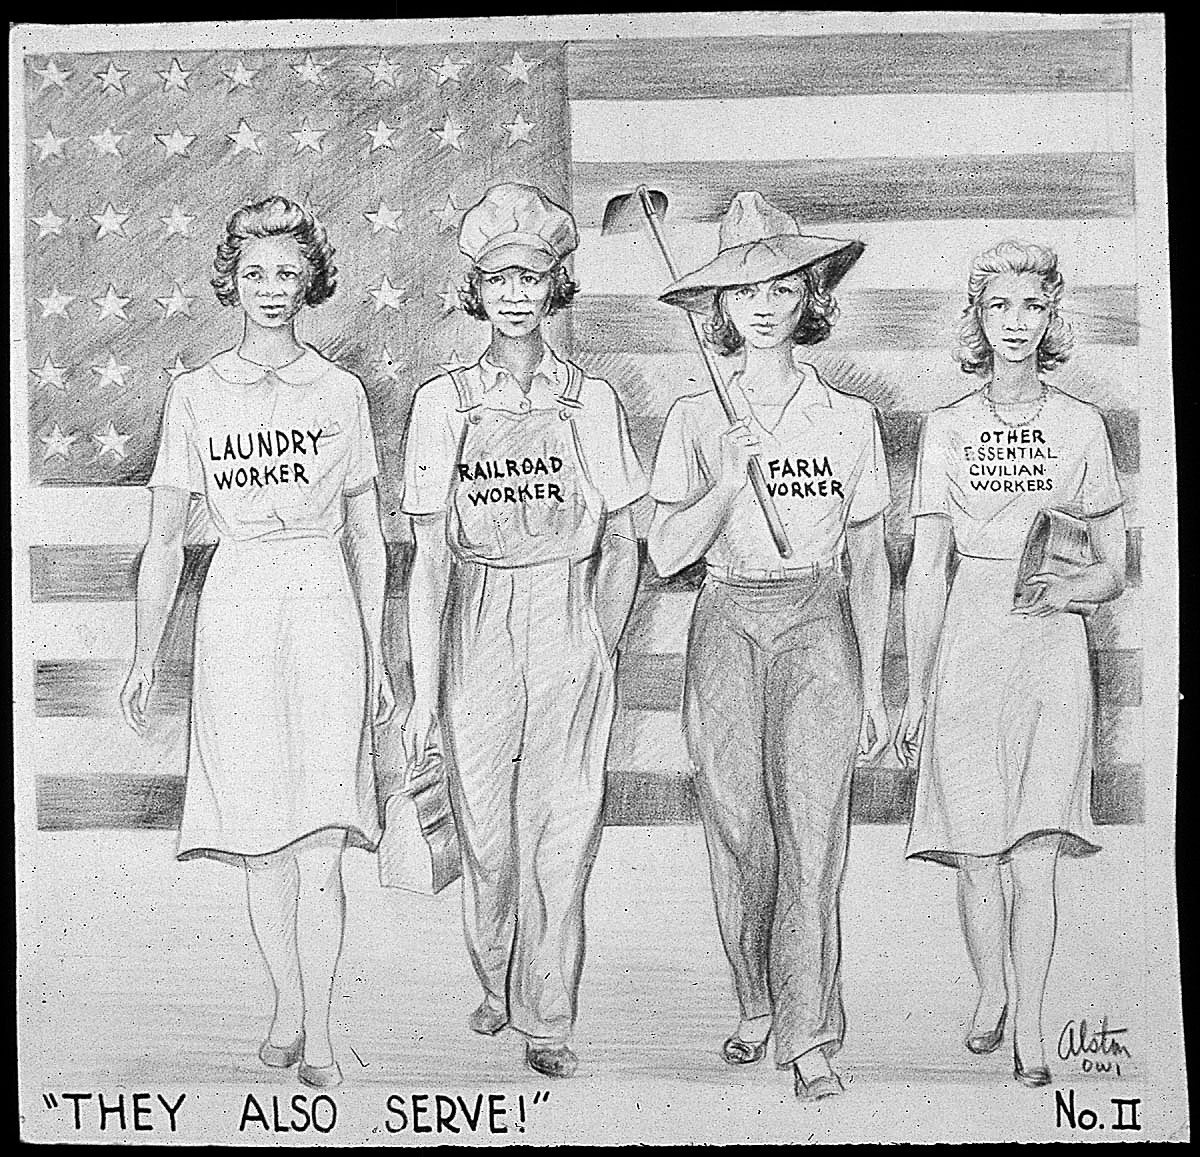 They Also Serve! No. II